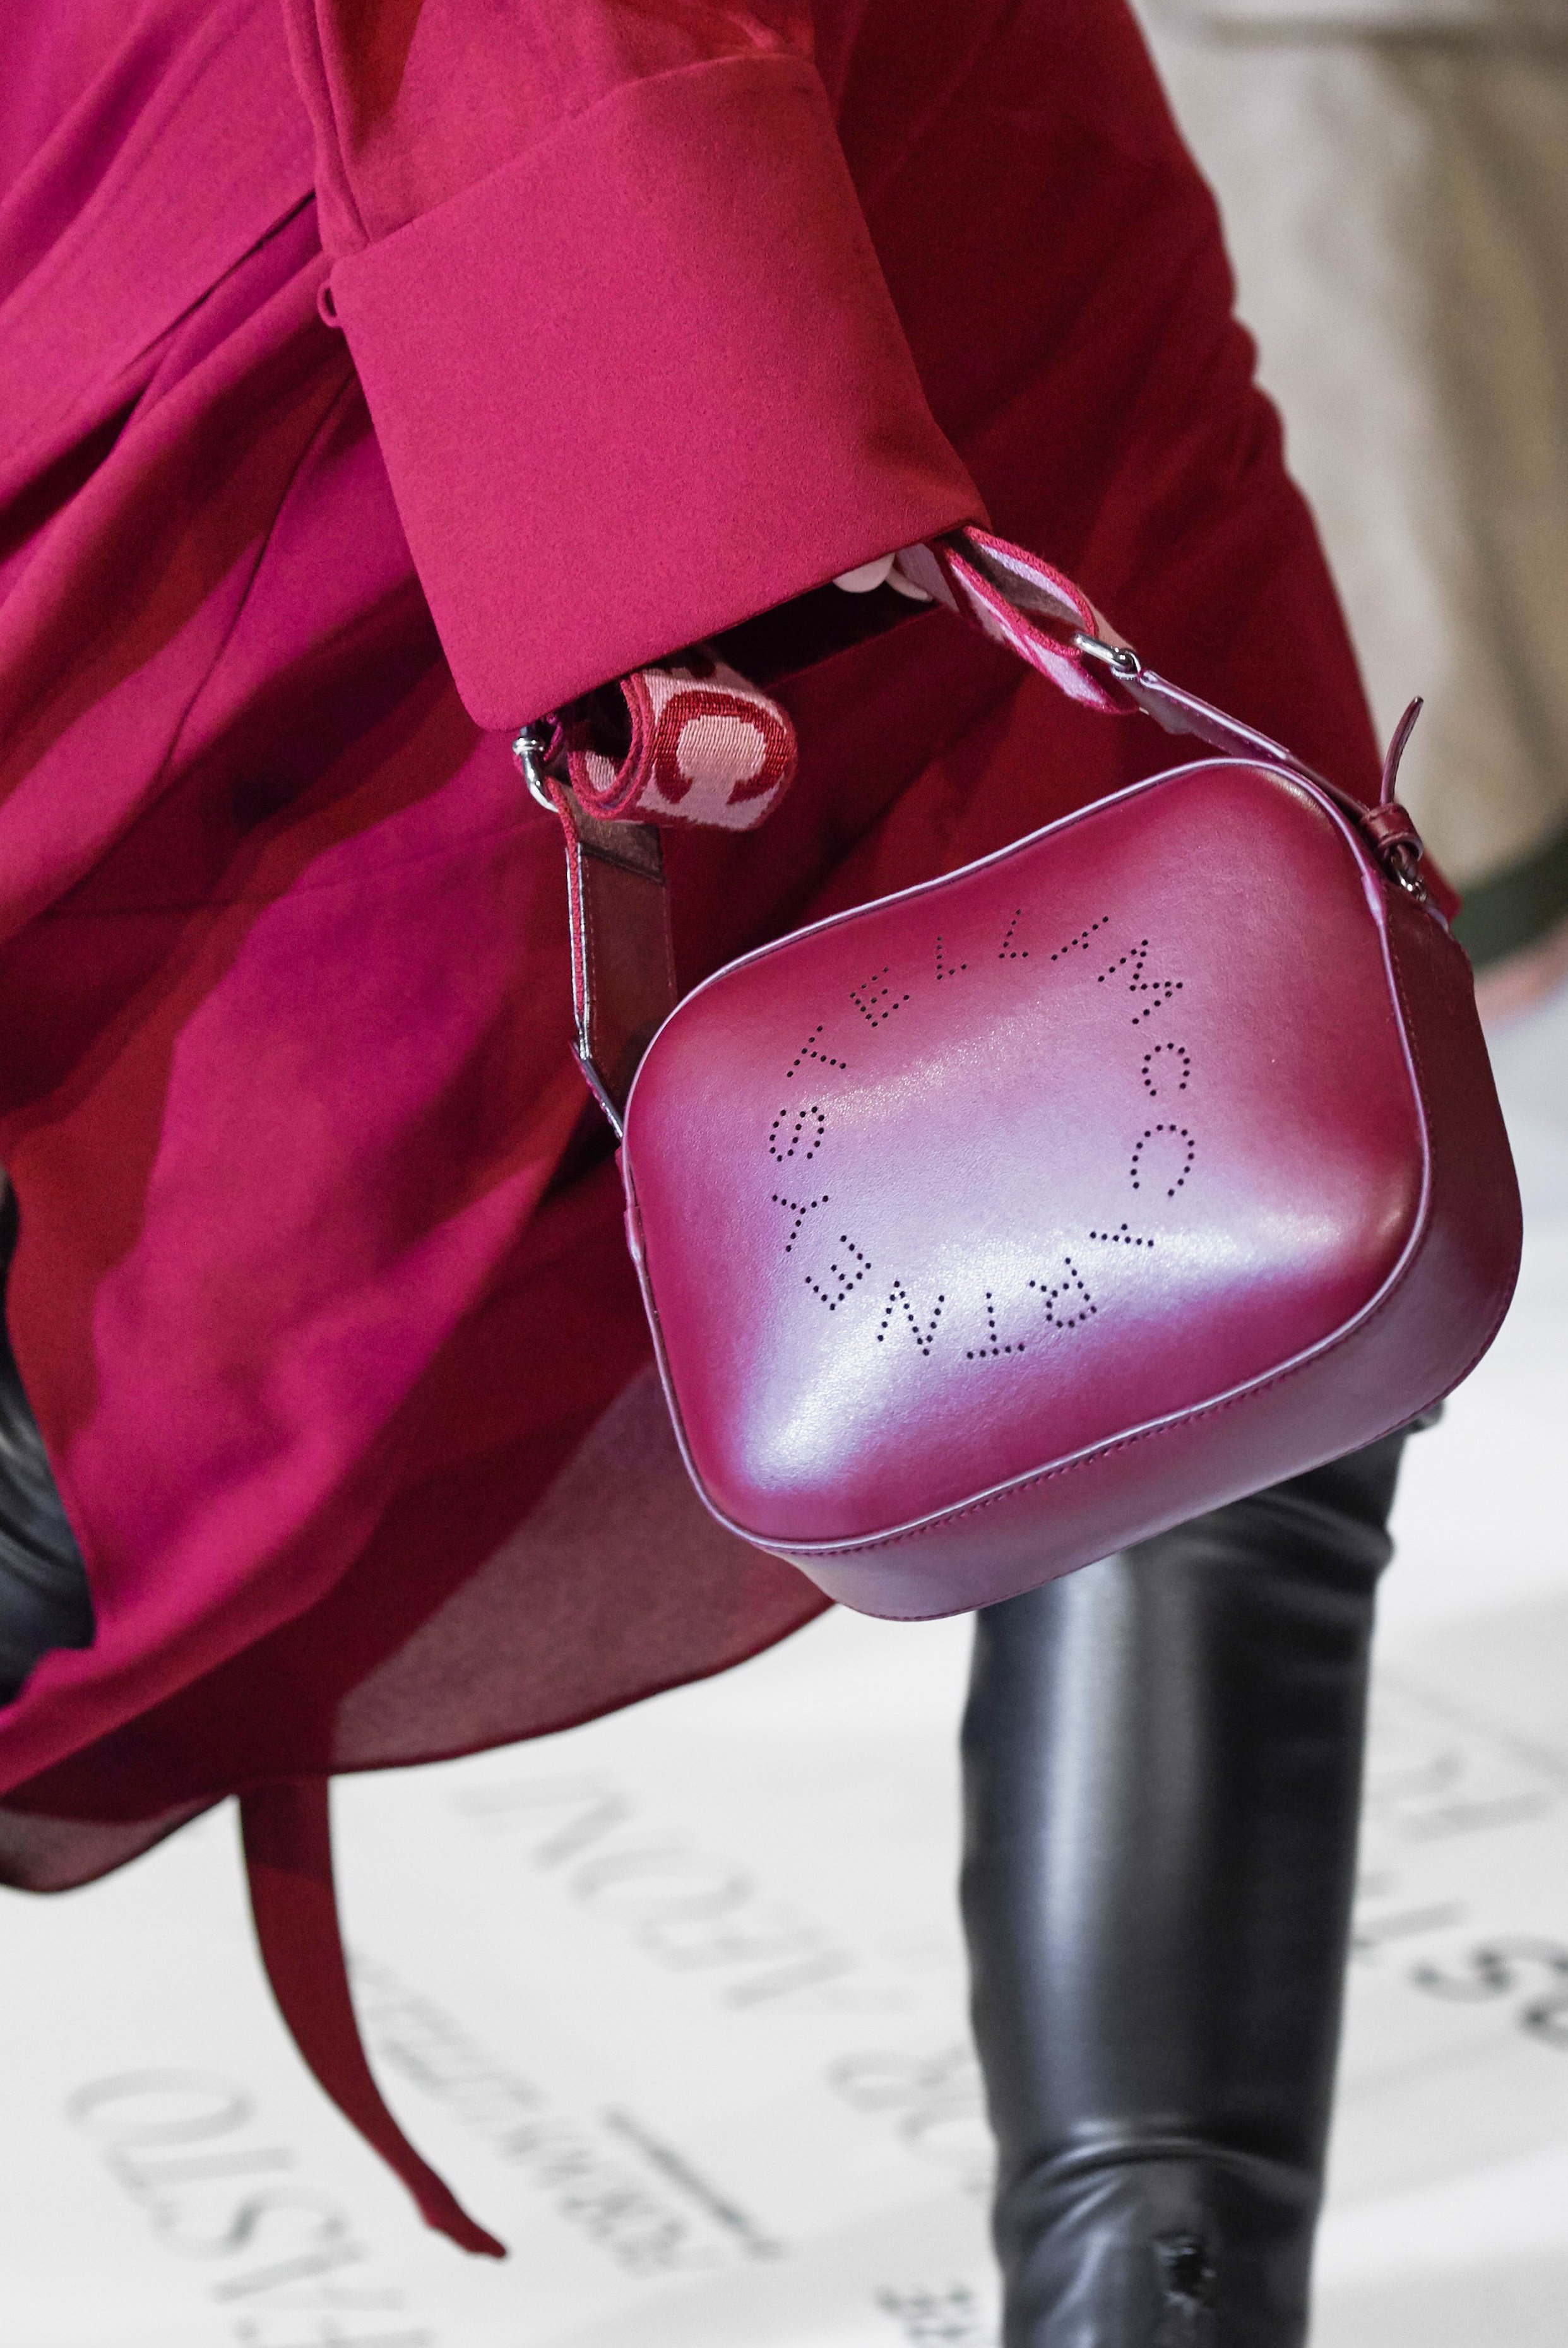 Stella McCartney Logo Mini bag from the Fall 2019 Runway Bag Collection